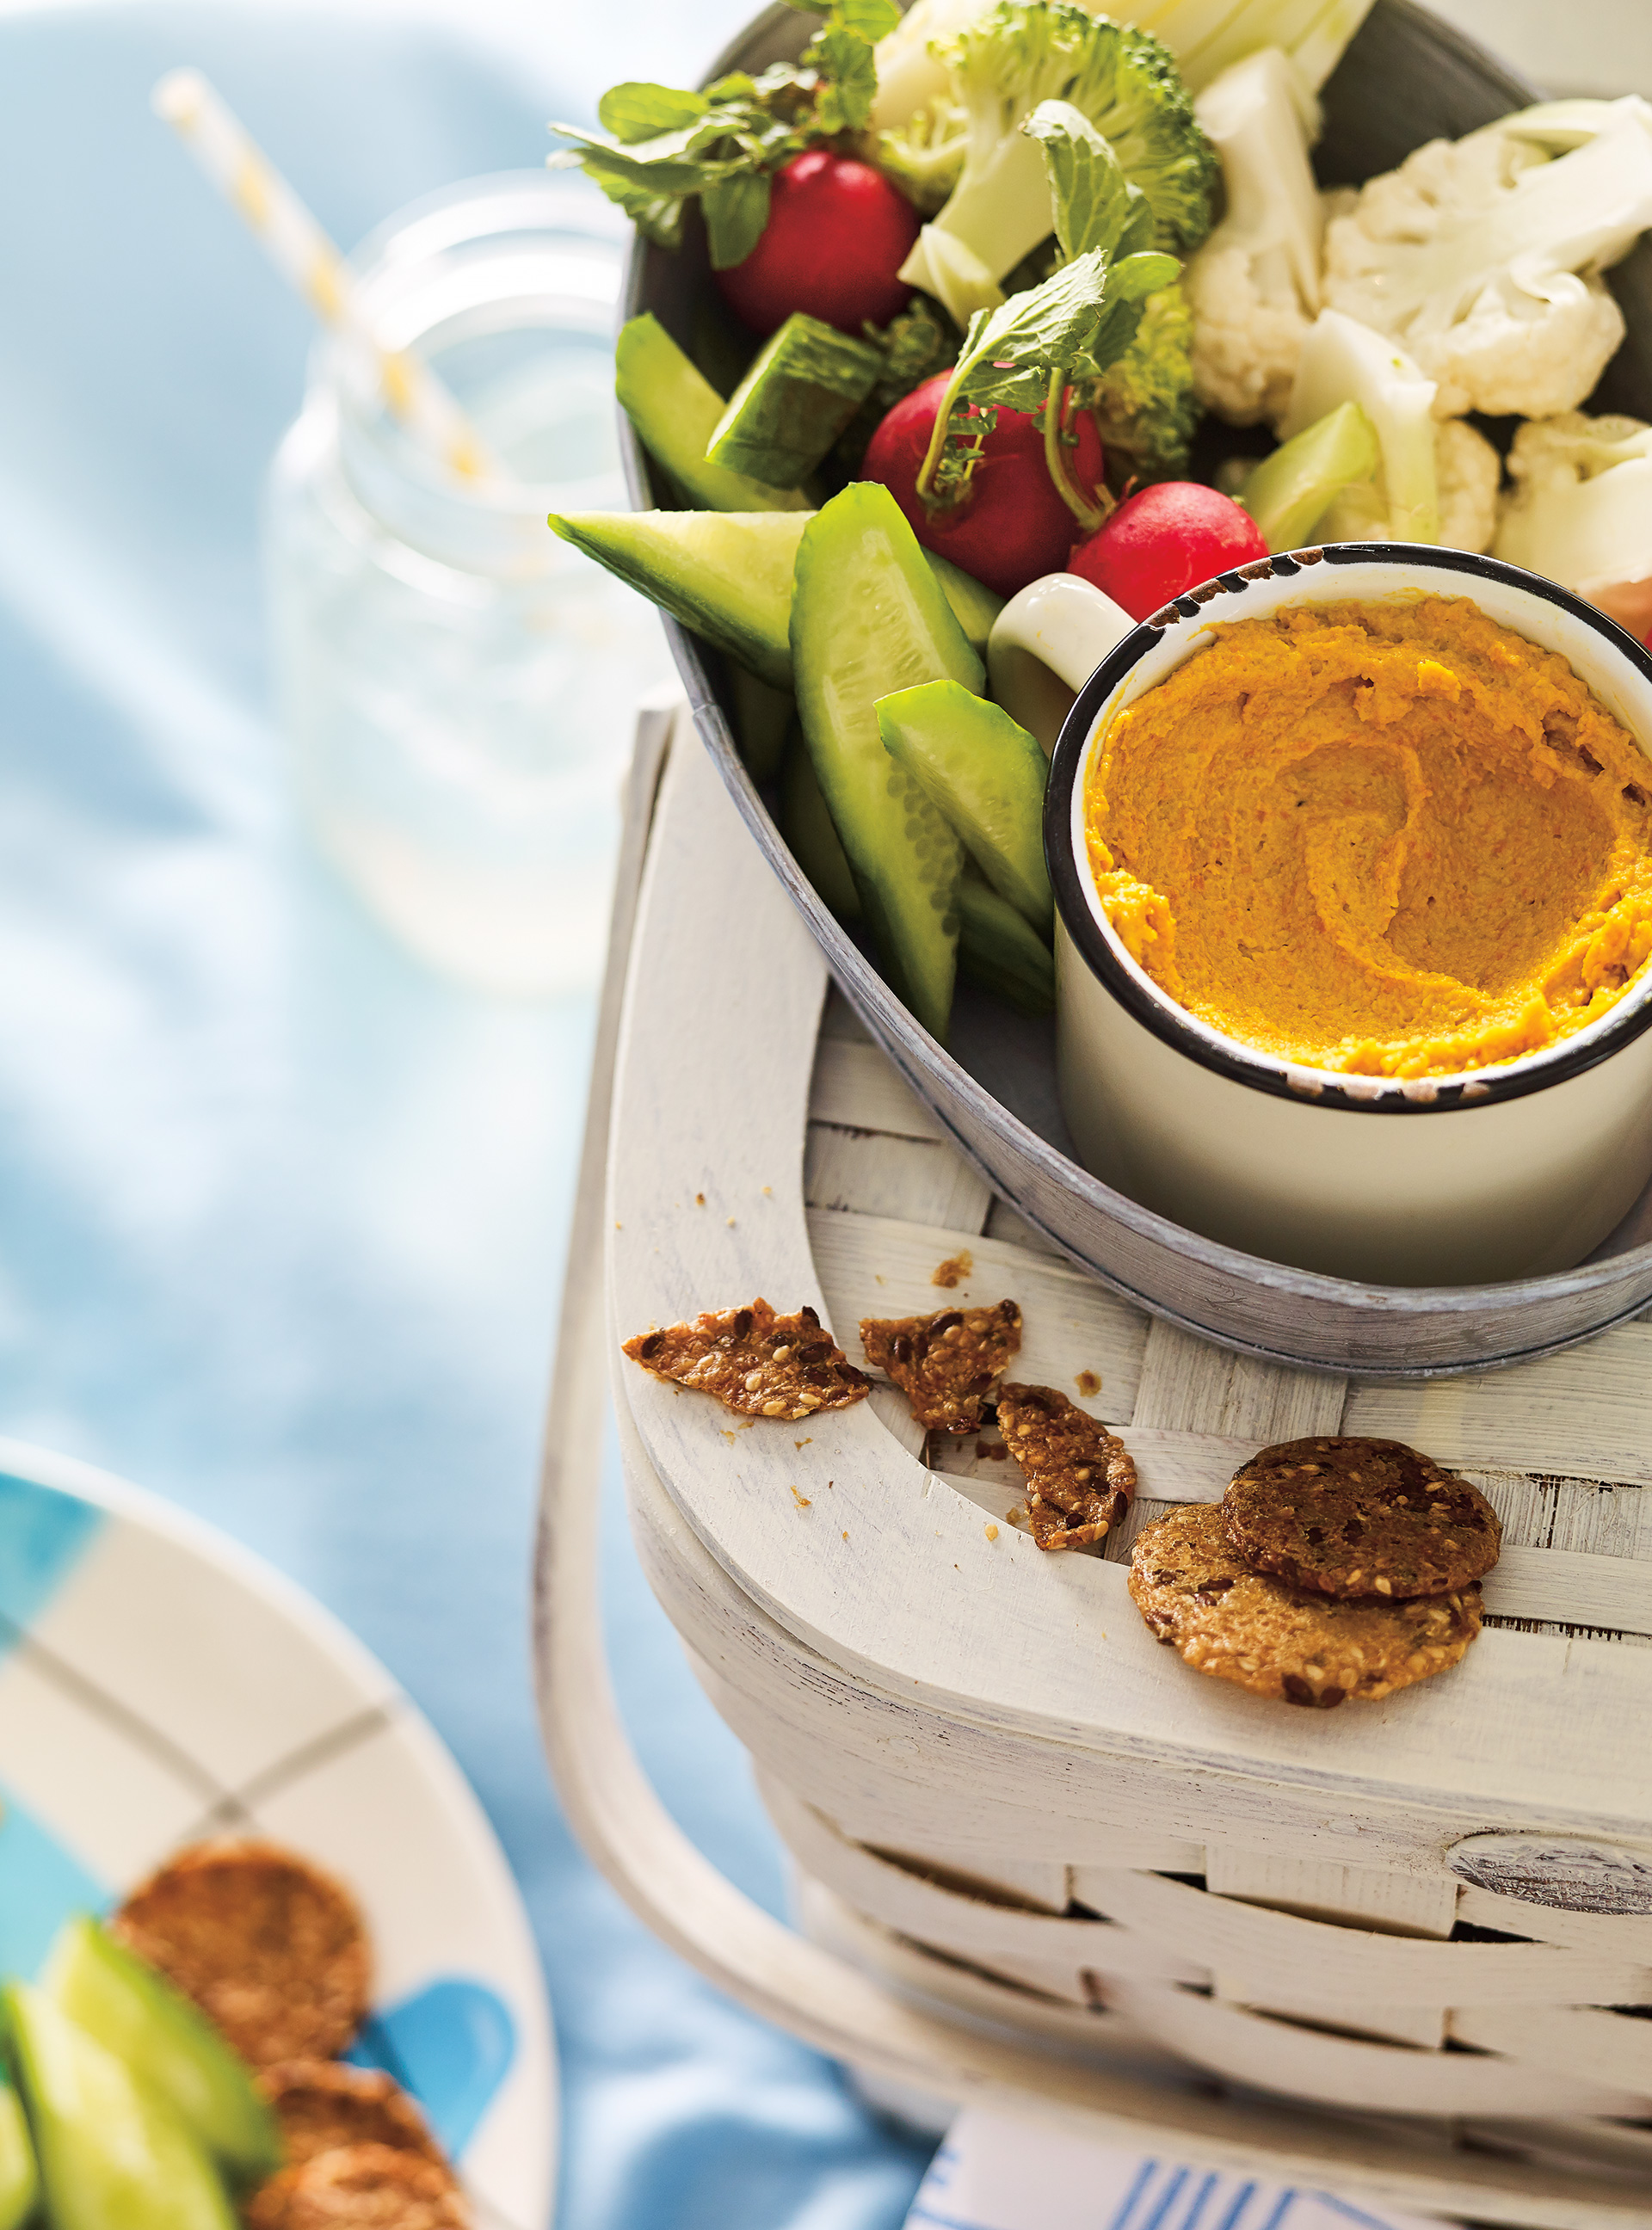 Carrot and Cashew Nut Spread